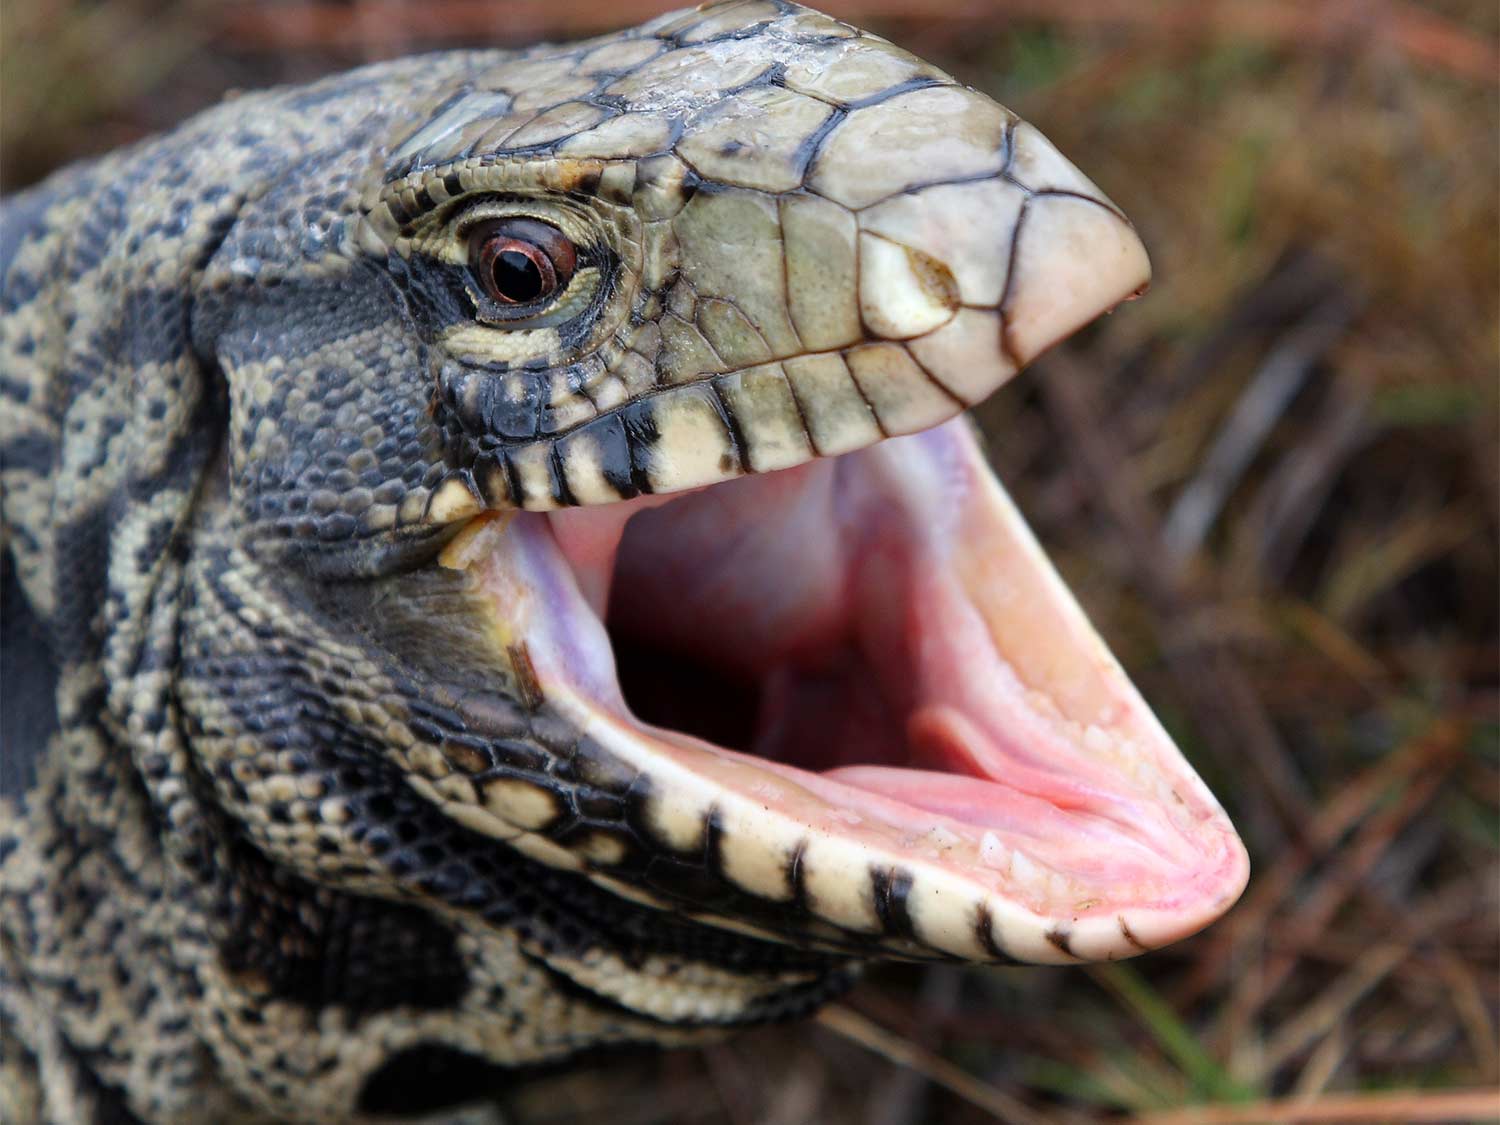 An Argentine tegu with its mouth open.